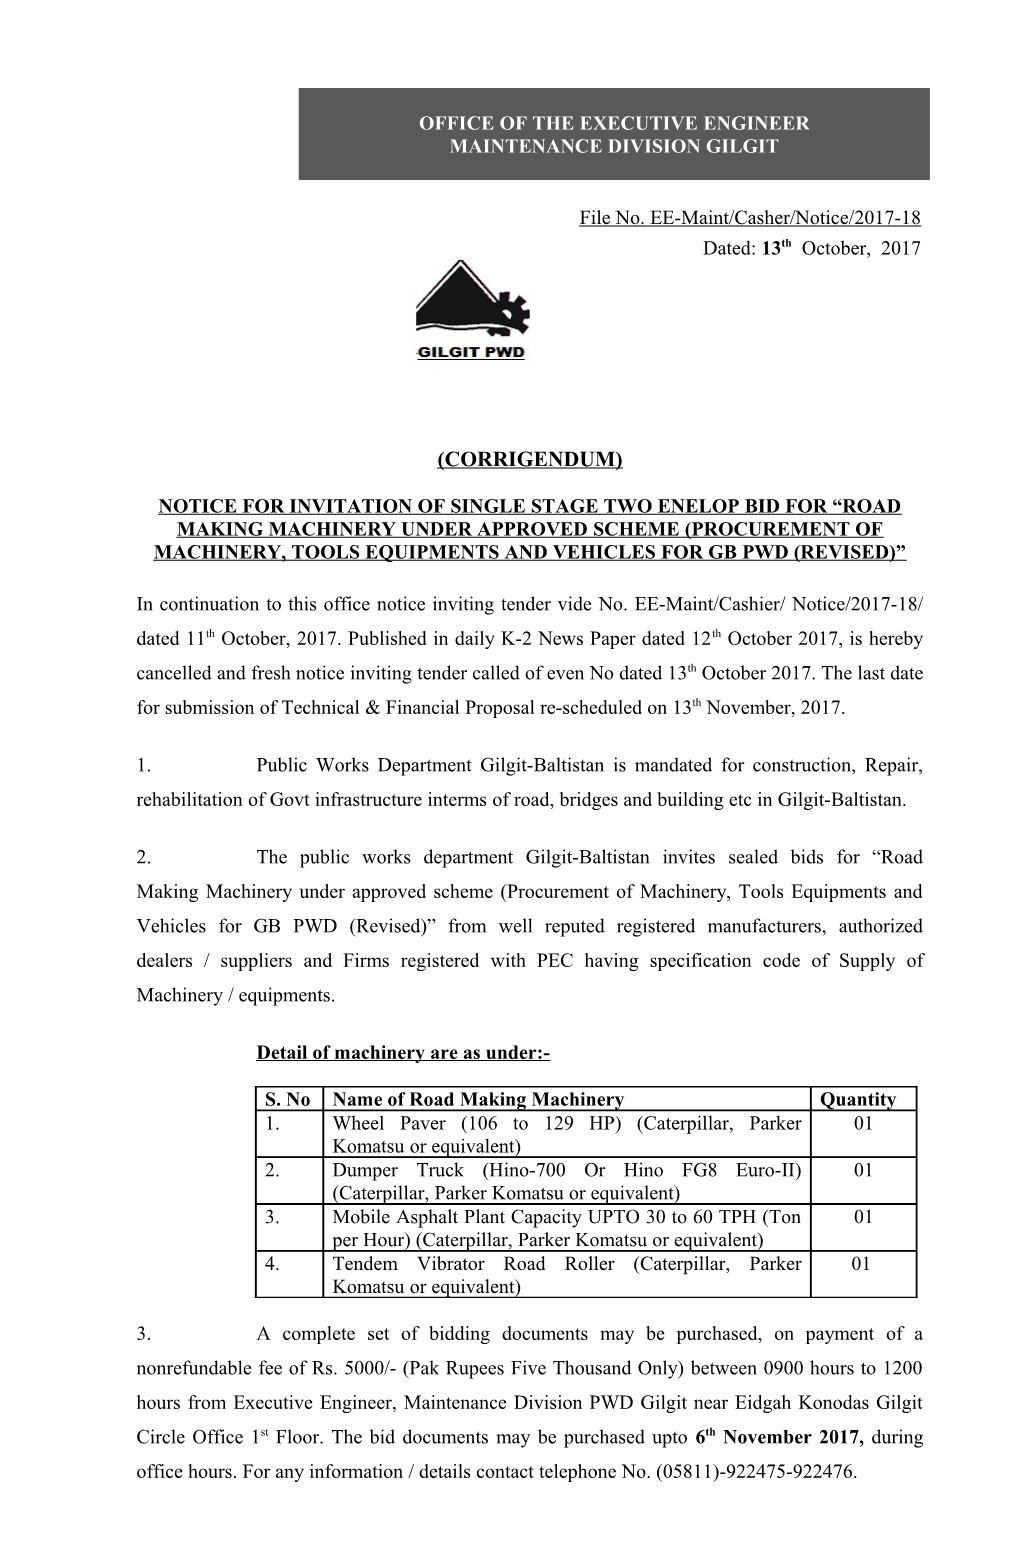 Notice for Invitation of Single Stage Two Enelop Bid for Road Making Machinery Under Approved